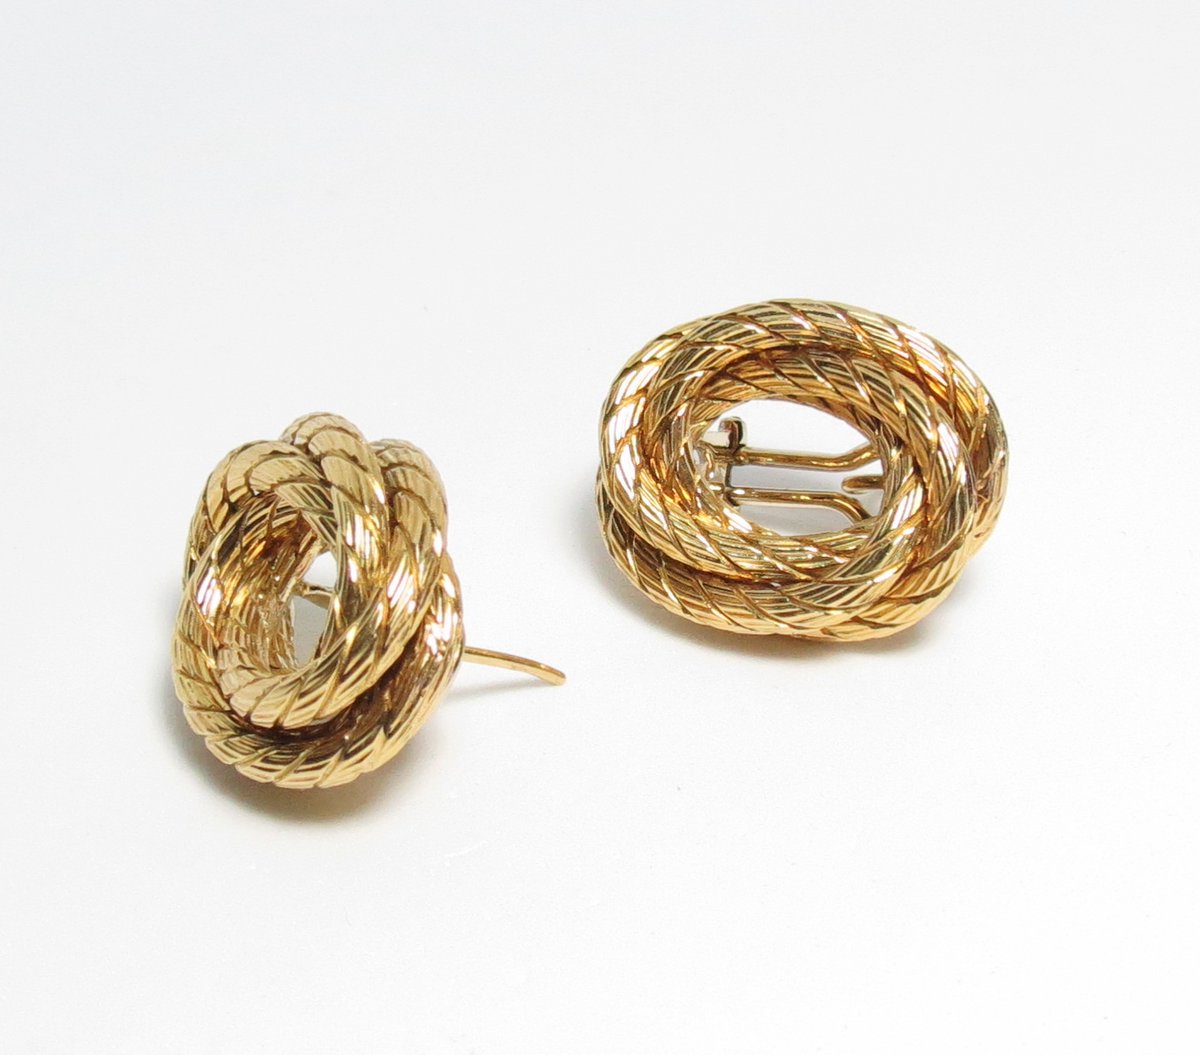 Designer Carlo Weingrill Italy 18k Gold Twisted Rope Earrings

Check Out Our WEB PAGE @
kingstonbaygallery.com

#vintagejewelry #antiquejewelry #vintage #jewelry #carloweingrill #weingrillearrings #18k #yellowgold #twistedgoldearrings #18ktwistedhoopearrings #18ktwistedrearring